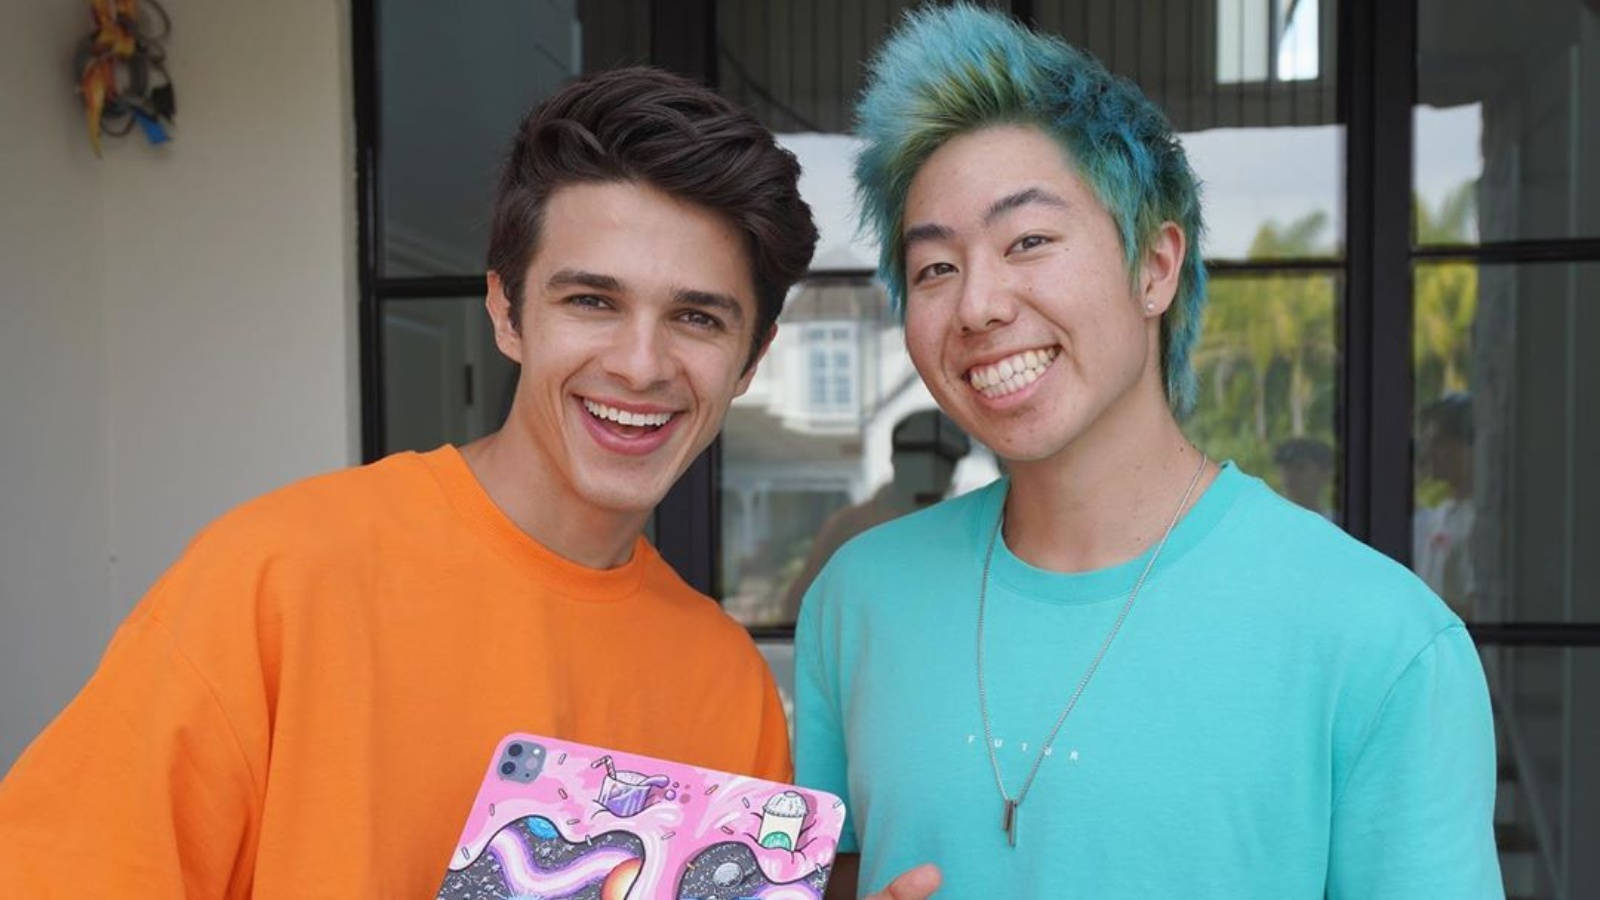 Brent Rivera and Zach Hsieh sharing a fun moment. Wallpaper